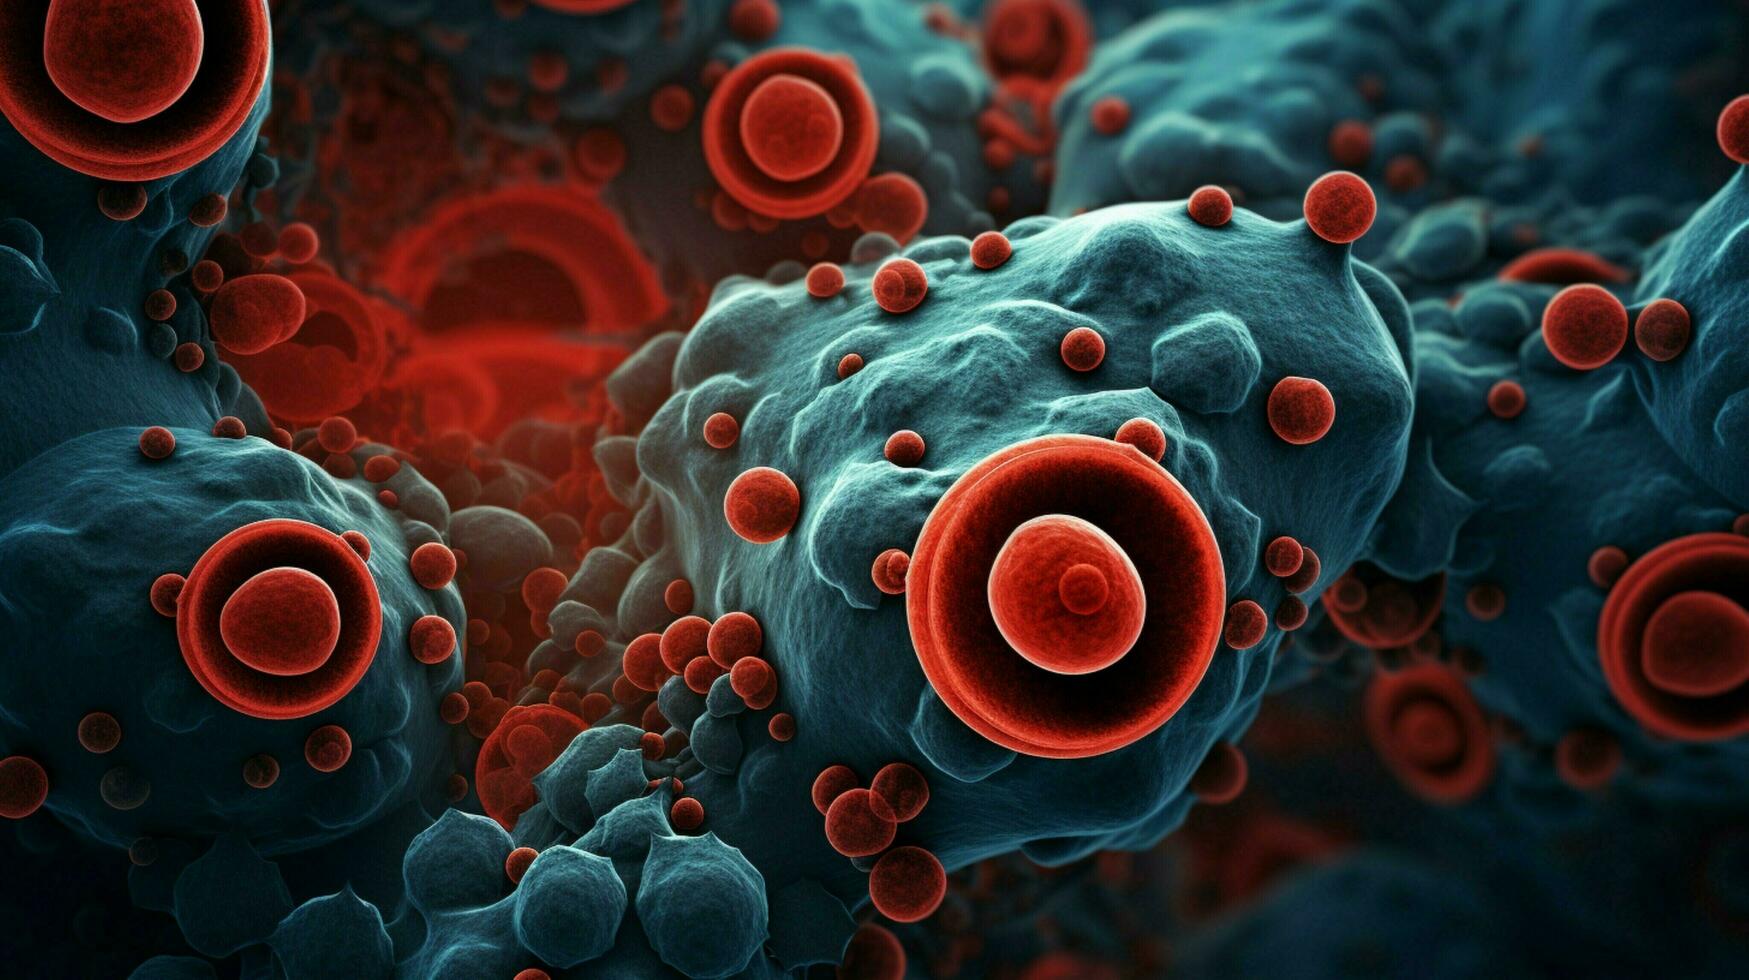 blood cells magnified revealing nature microscopic design photo